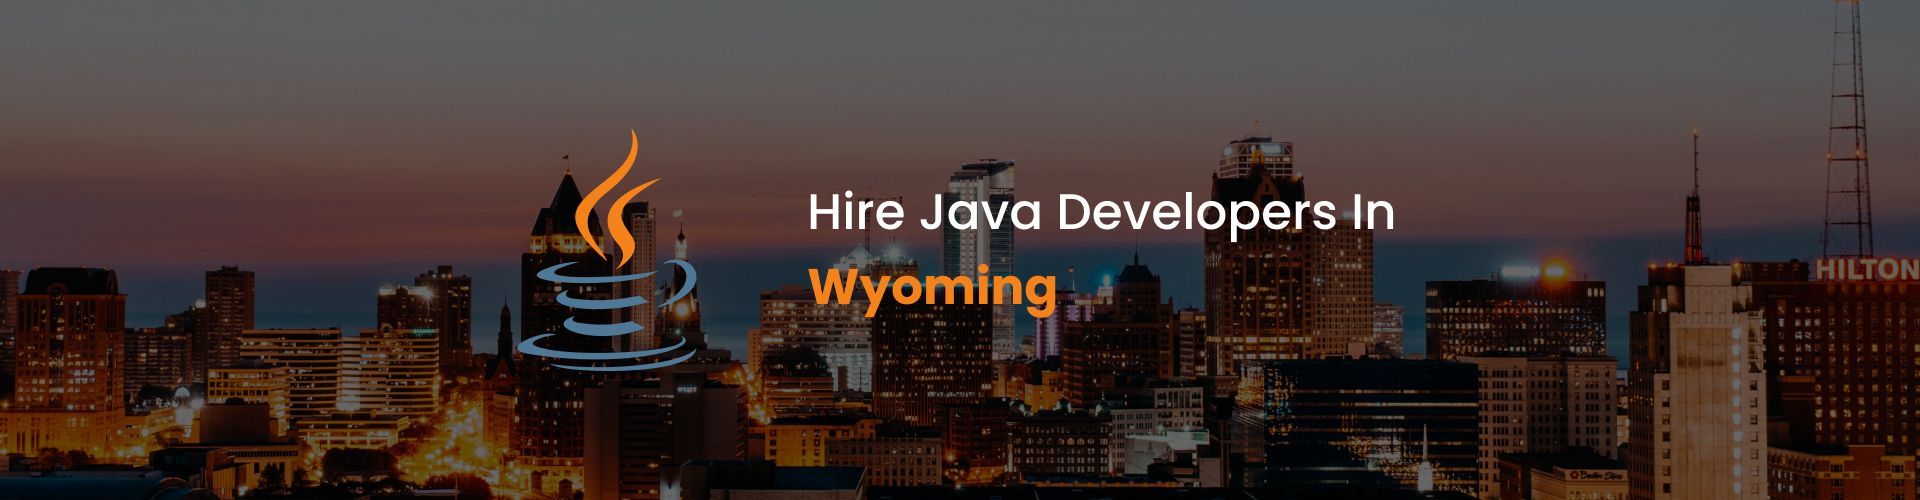 hire java developers in wyoming